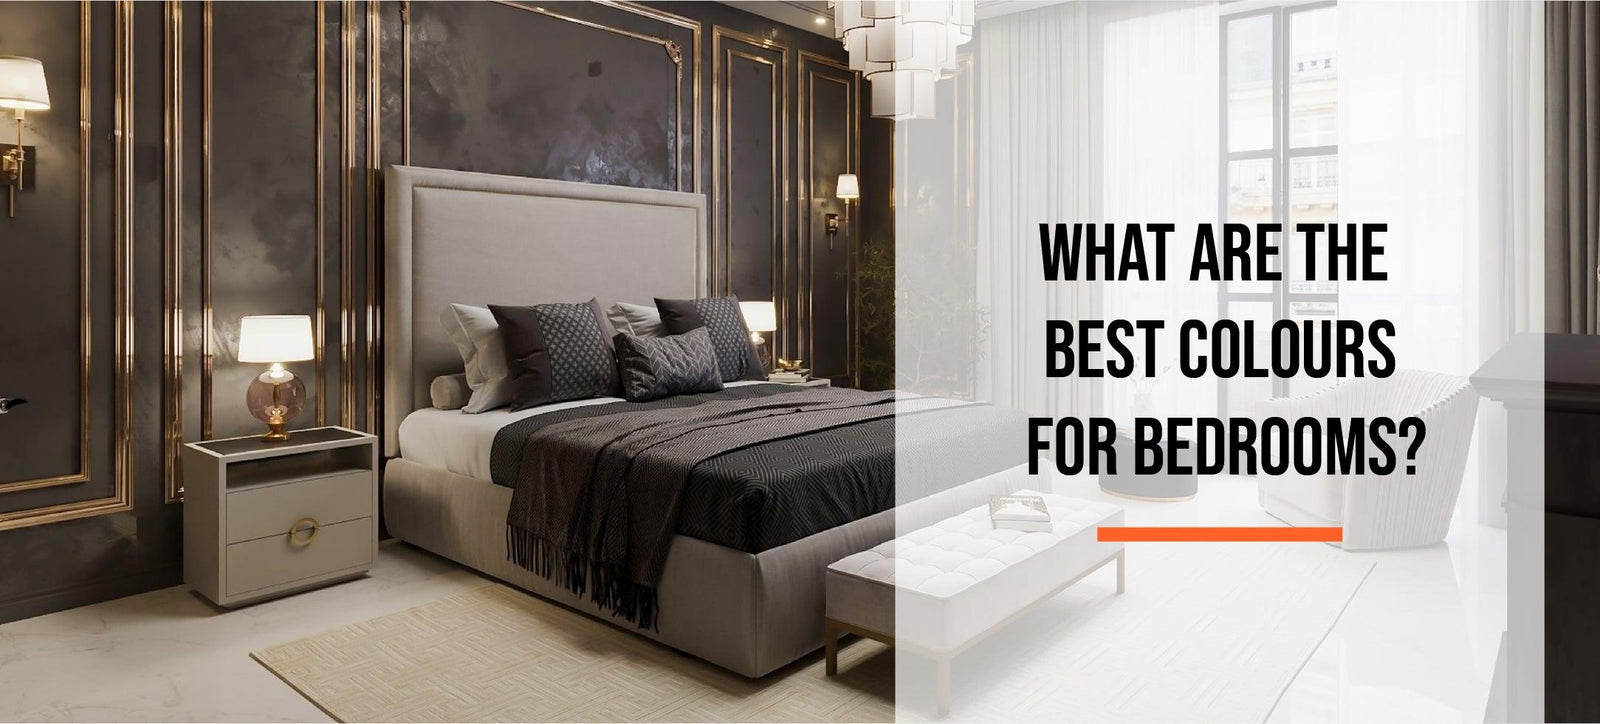 What are the best colours for bedrooms? - Heavenlybeds